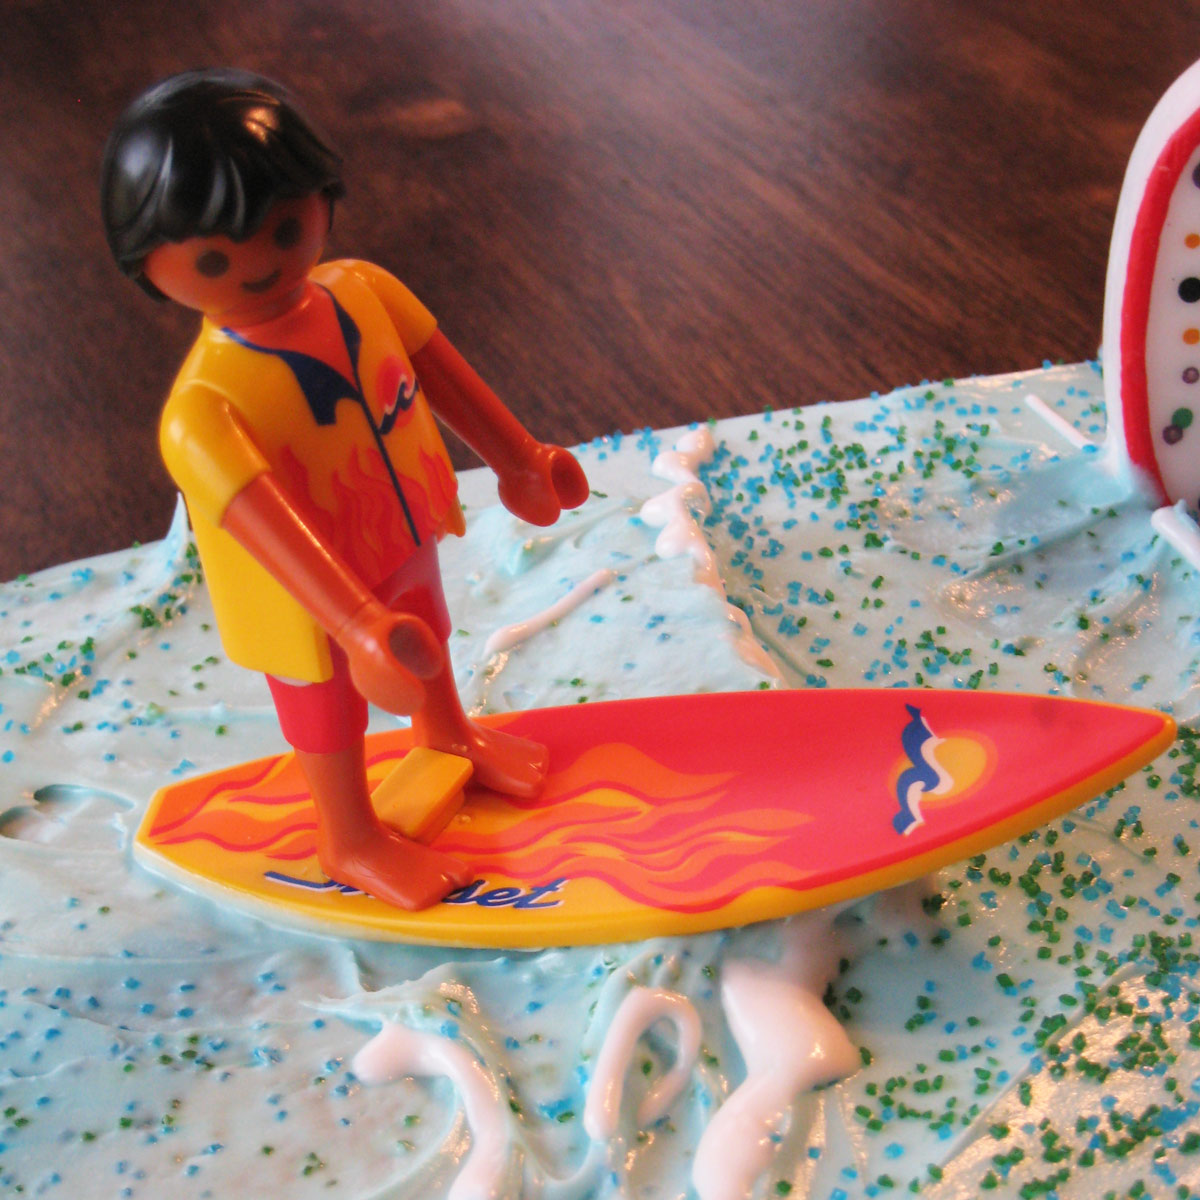 toy surfer on surfboard on frosting waves.